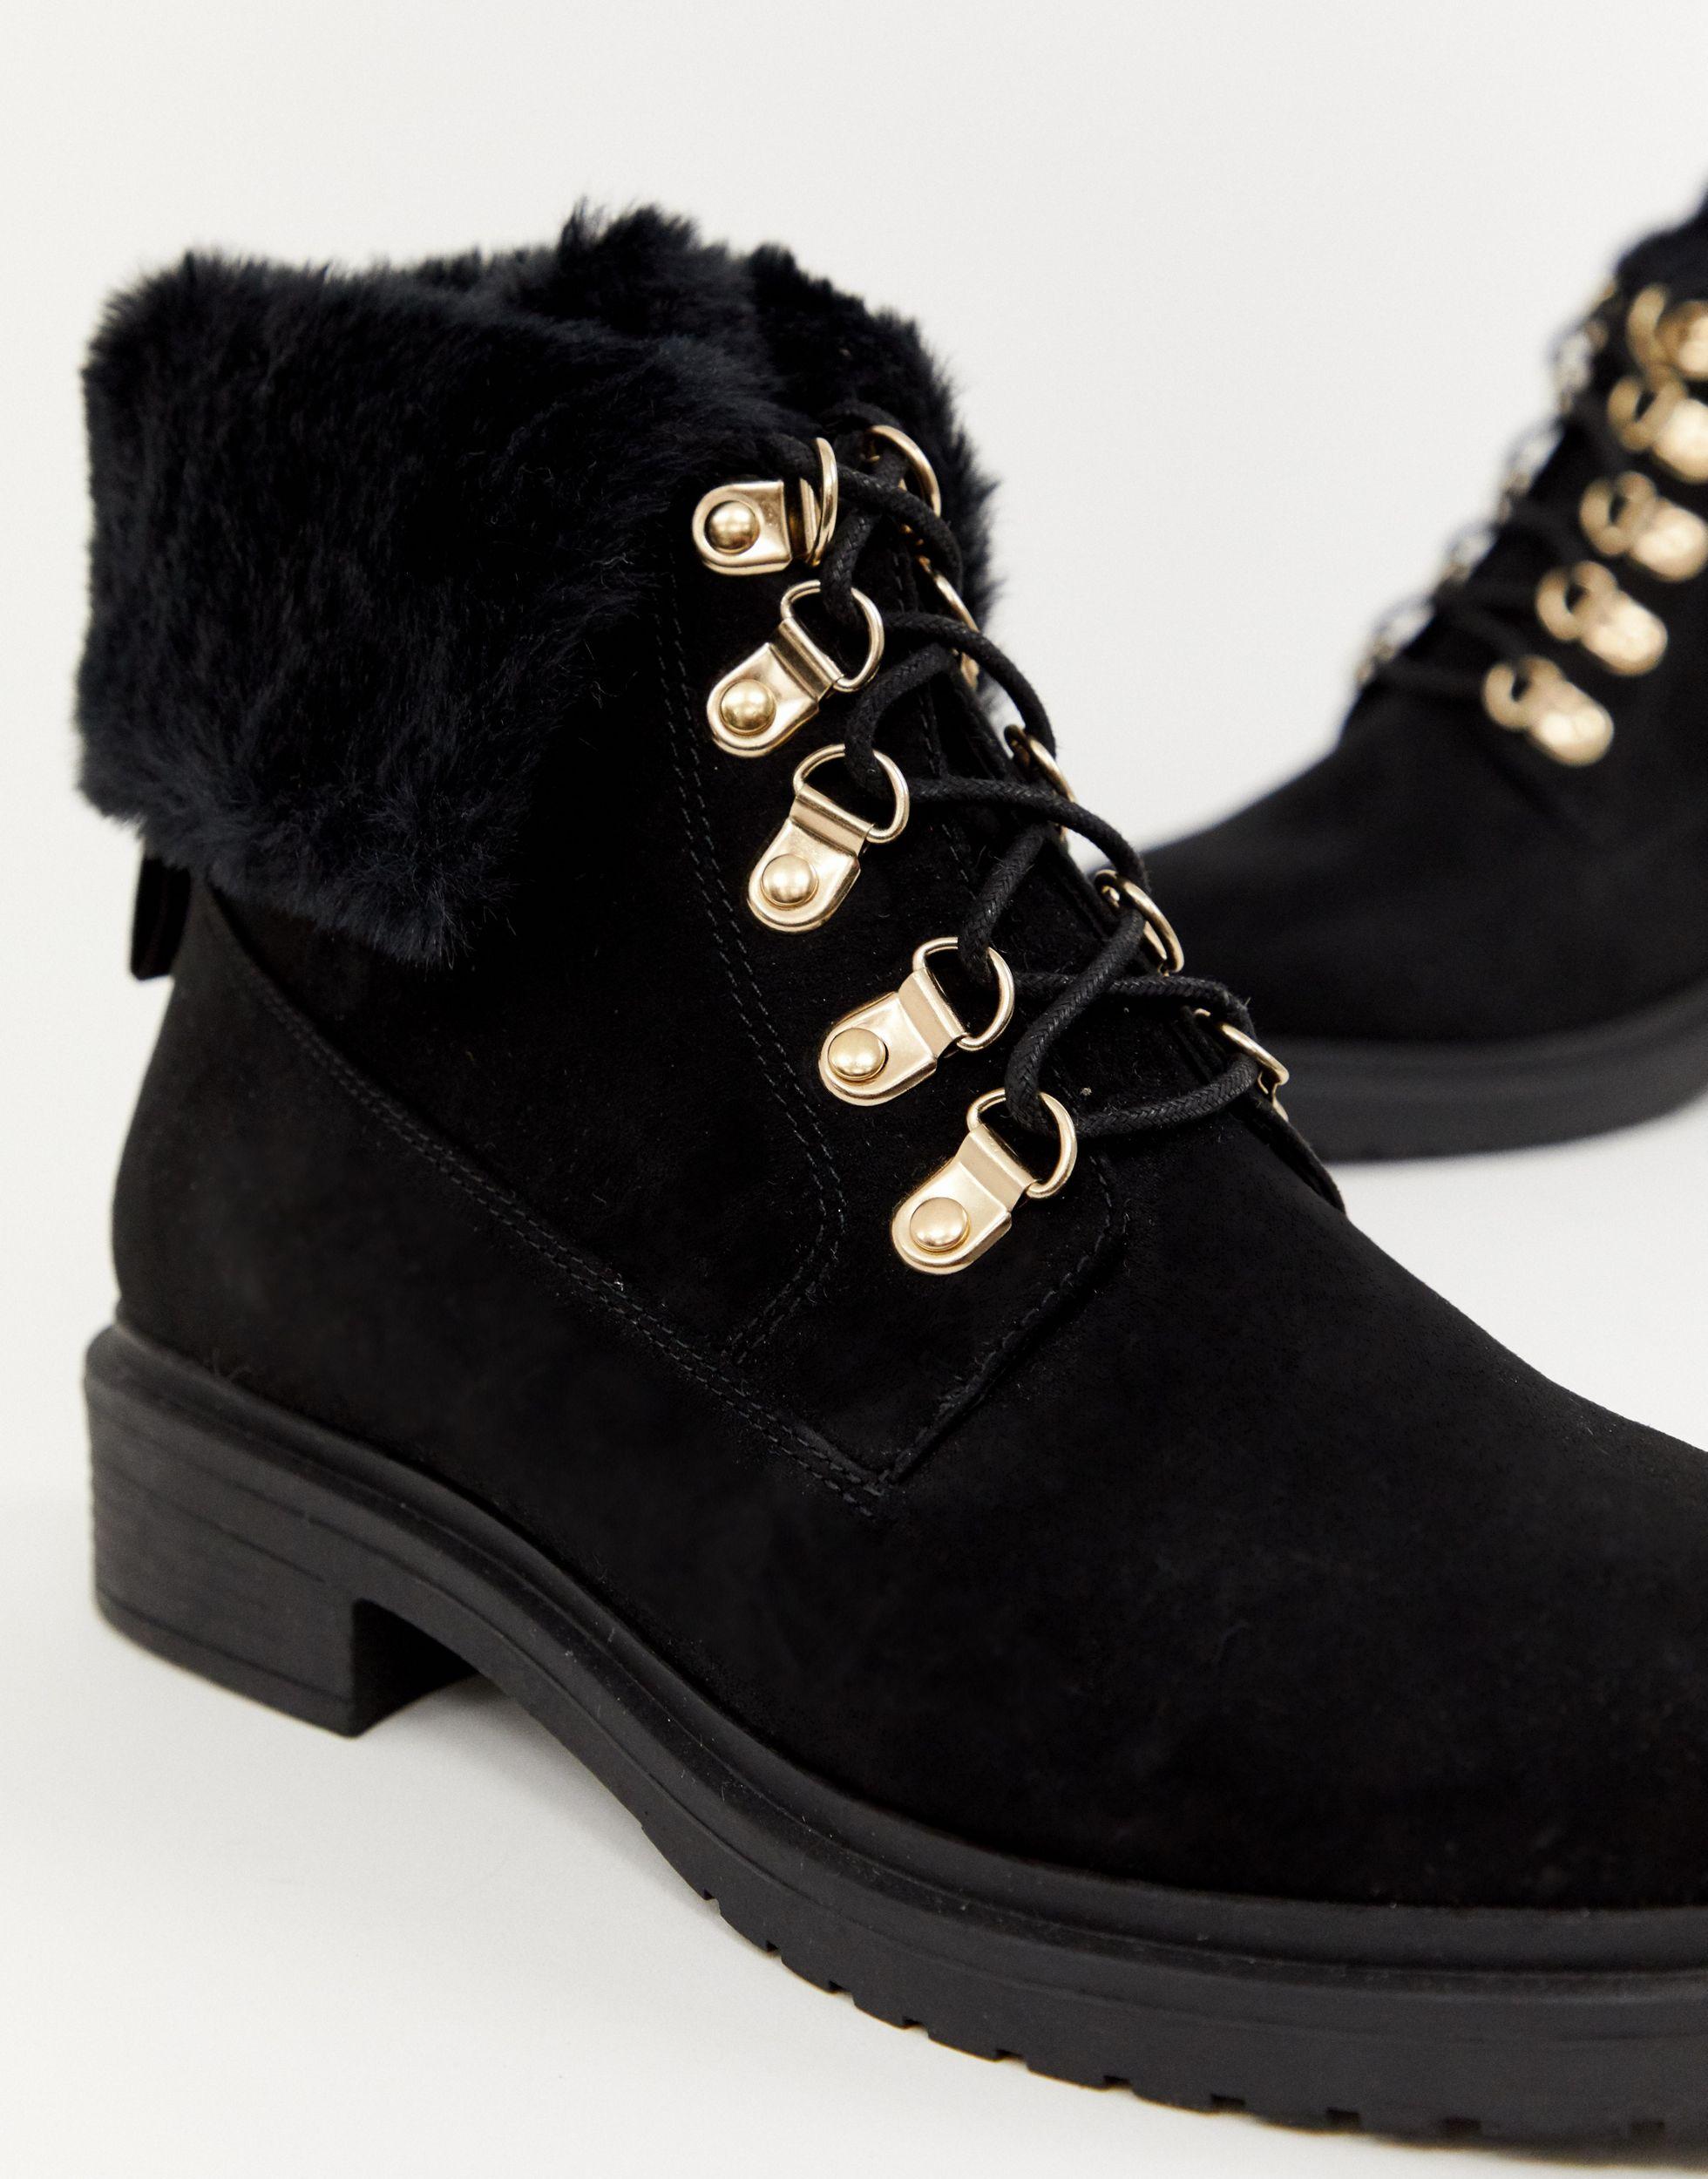 Miss Selfridge Lace Up Ankle Boots With Faux Fur Lining in Black - Lyst